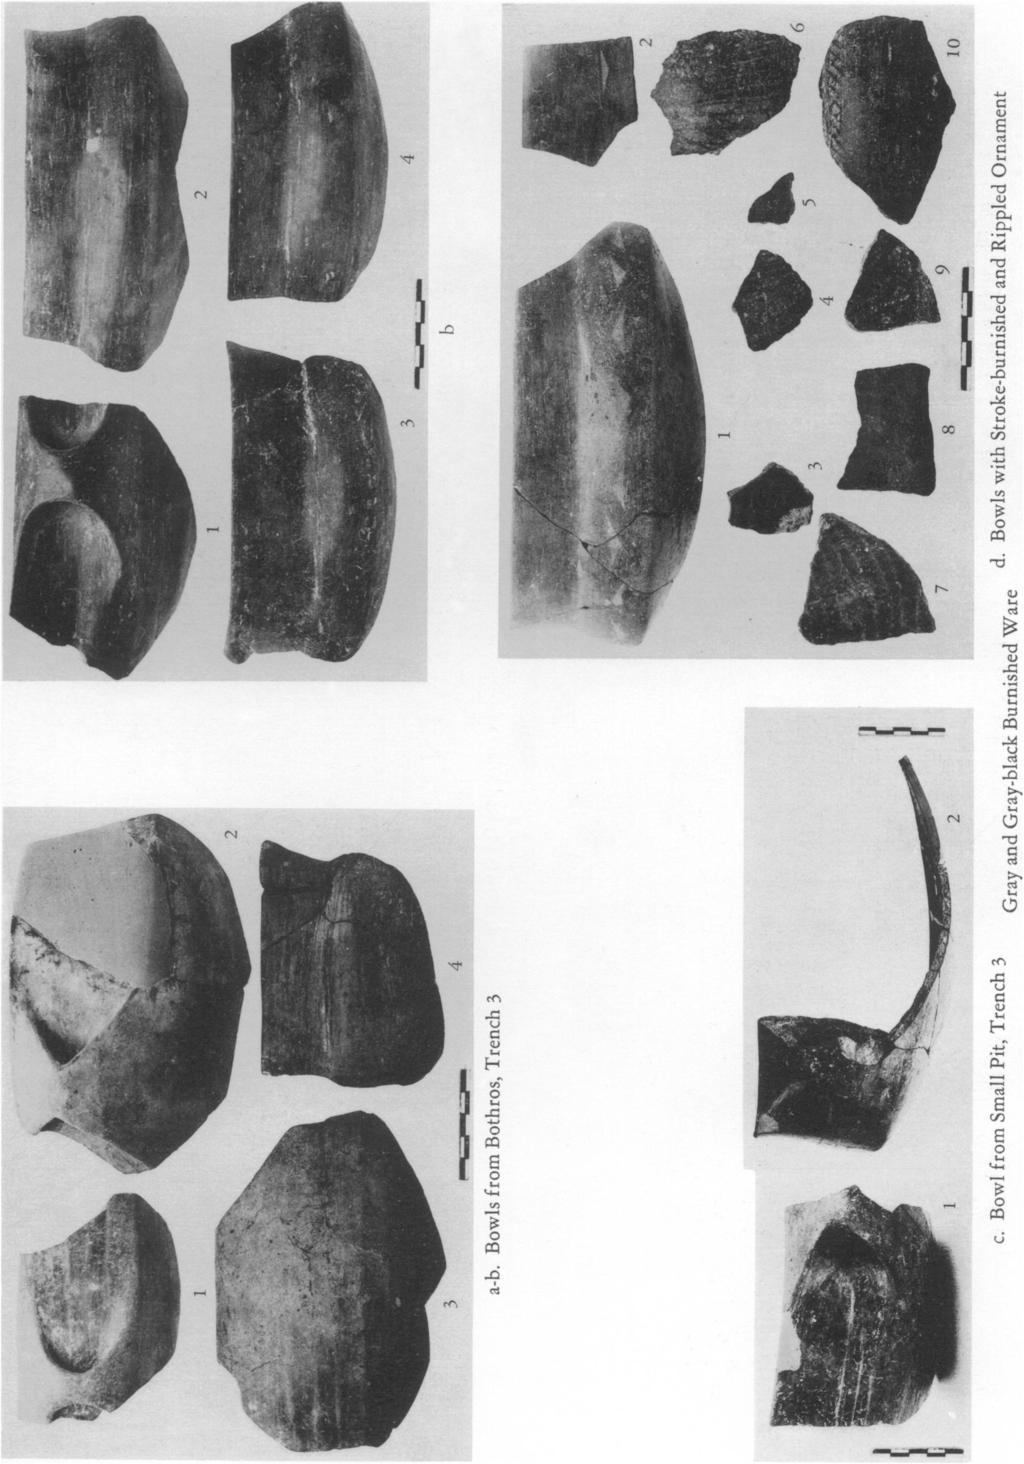 2 _~~~~~~~~~~~~~~~~~~~~~~ a-b. Bowls from Bothros, Trench 3 c.